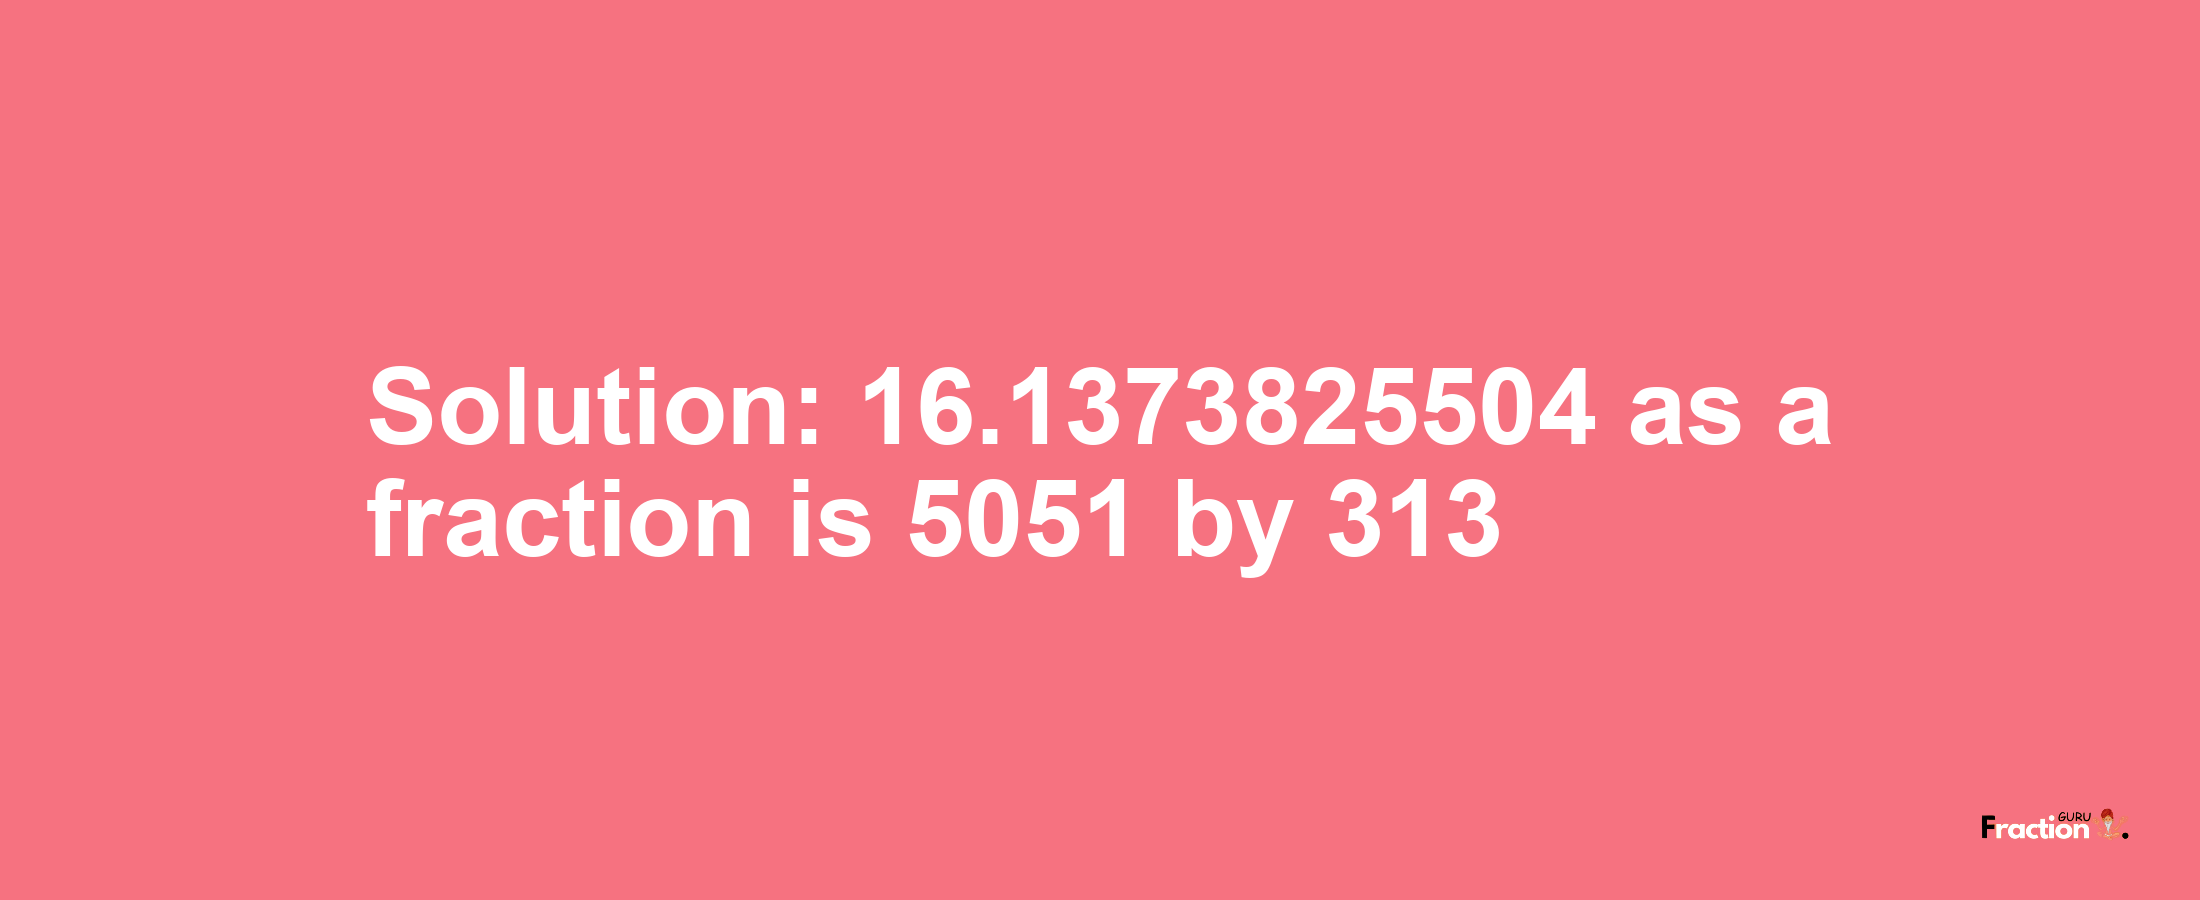 Solution:16.1373825504 as a fraction is 5051/313